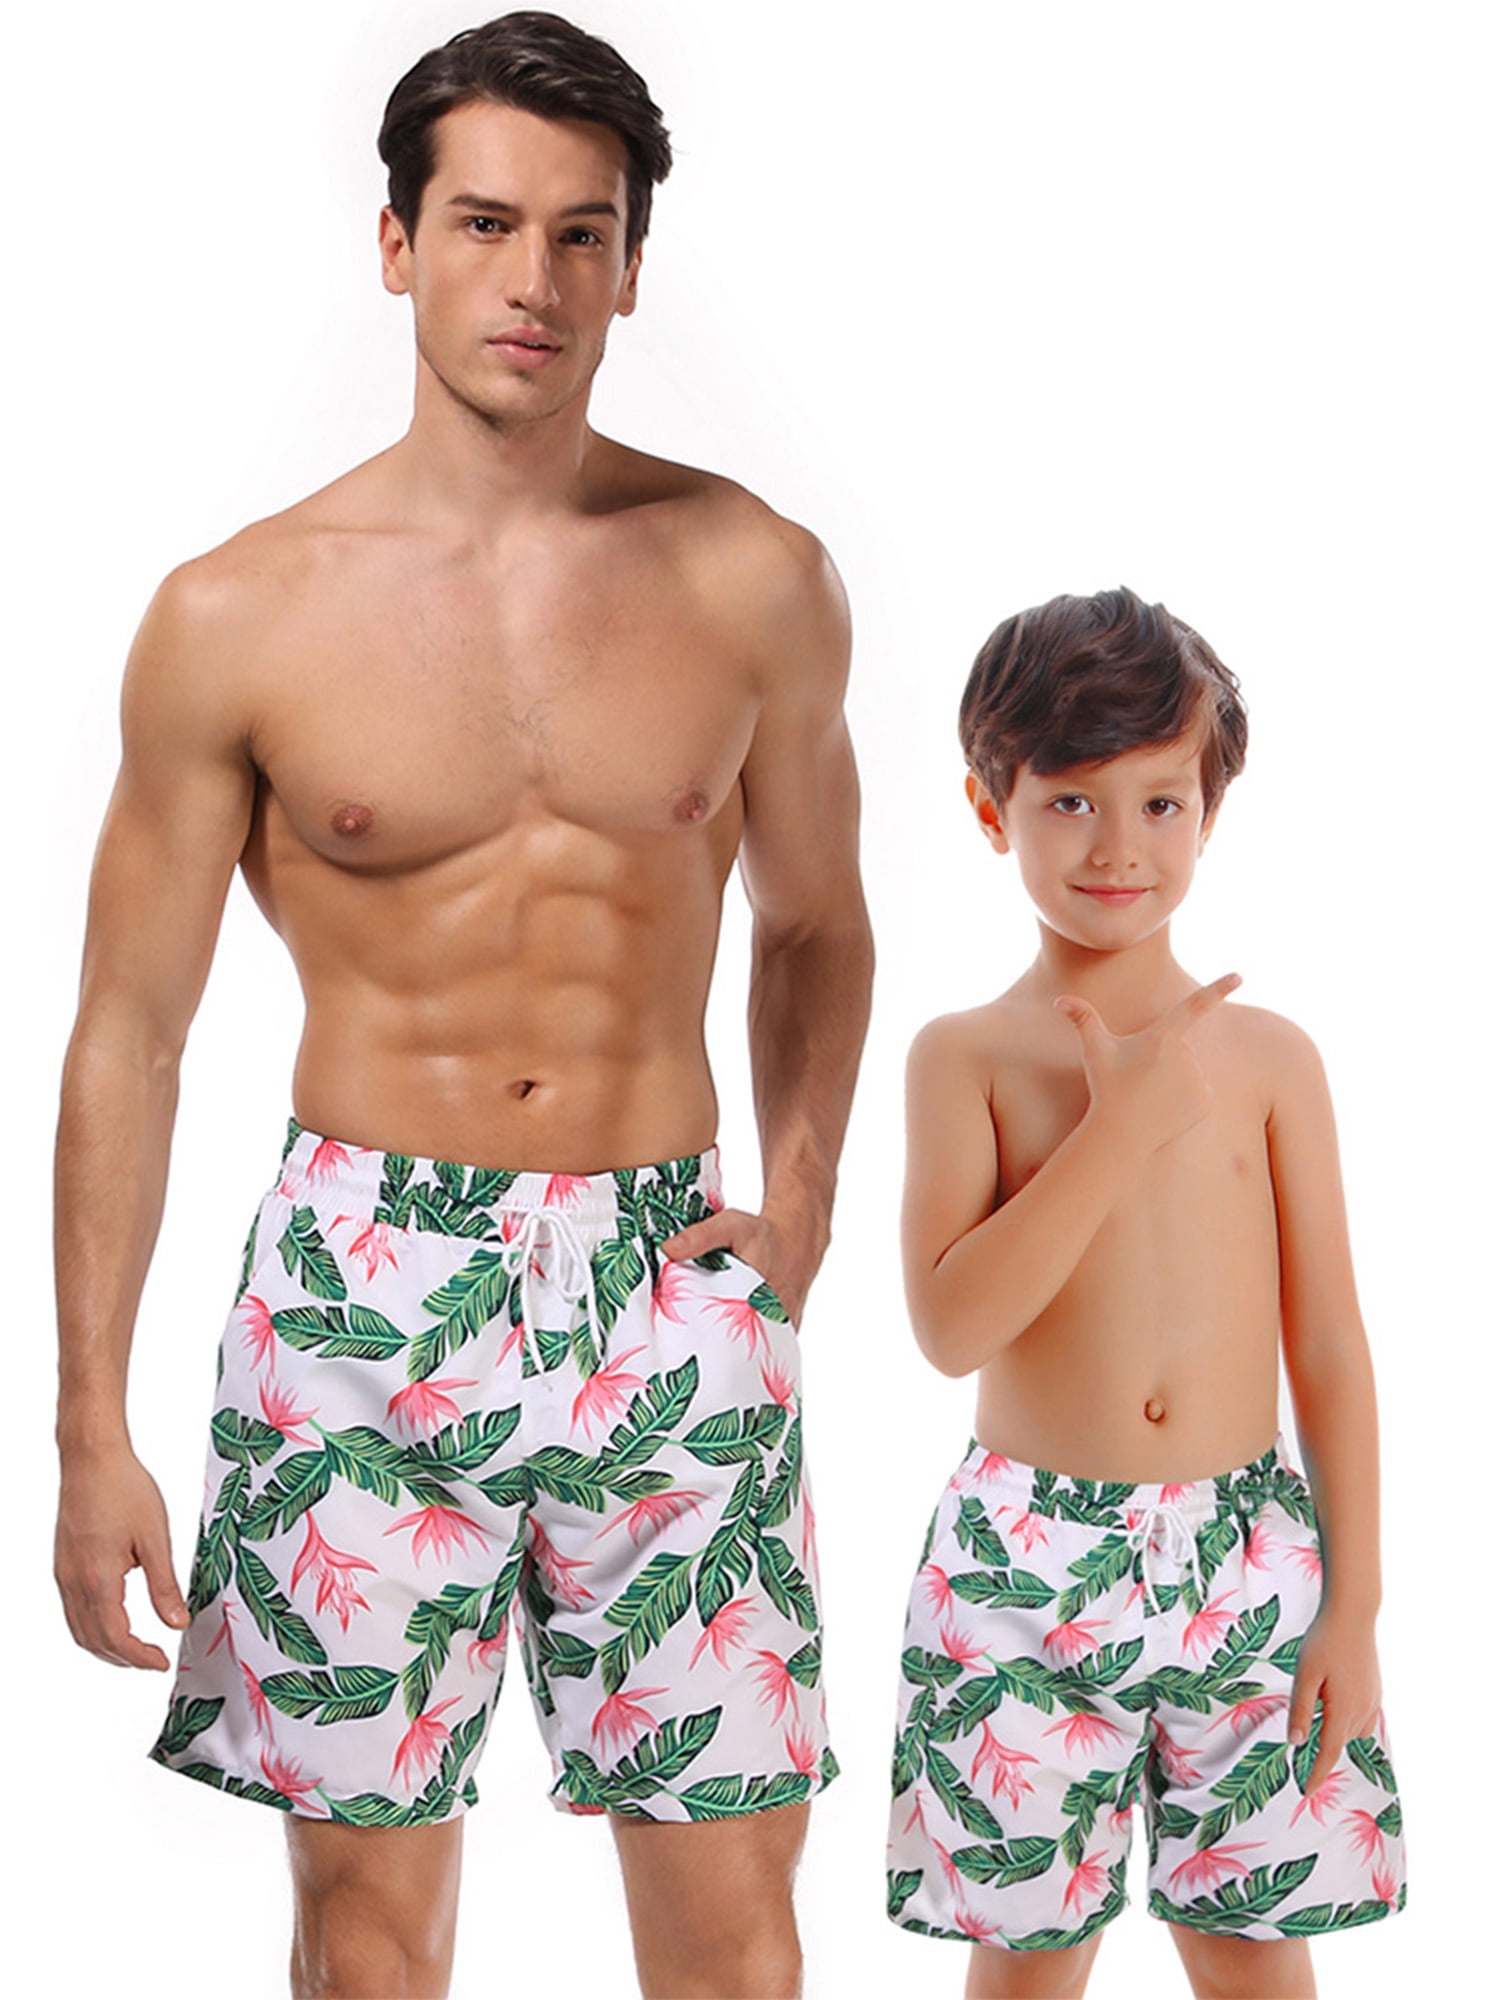 Matching Swimsuit Matching Dad And Son Swimsuit Matching Father And Son Swimwear Green leaf shorts Men Trunks